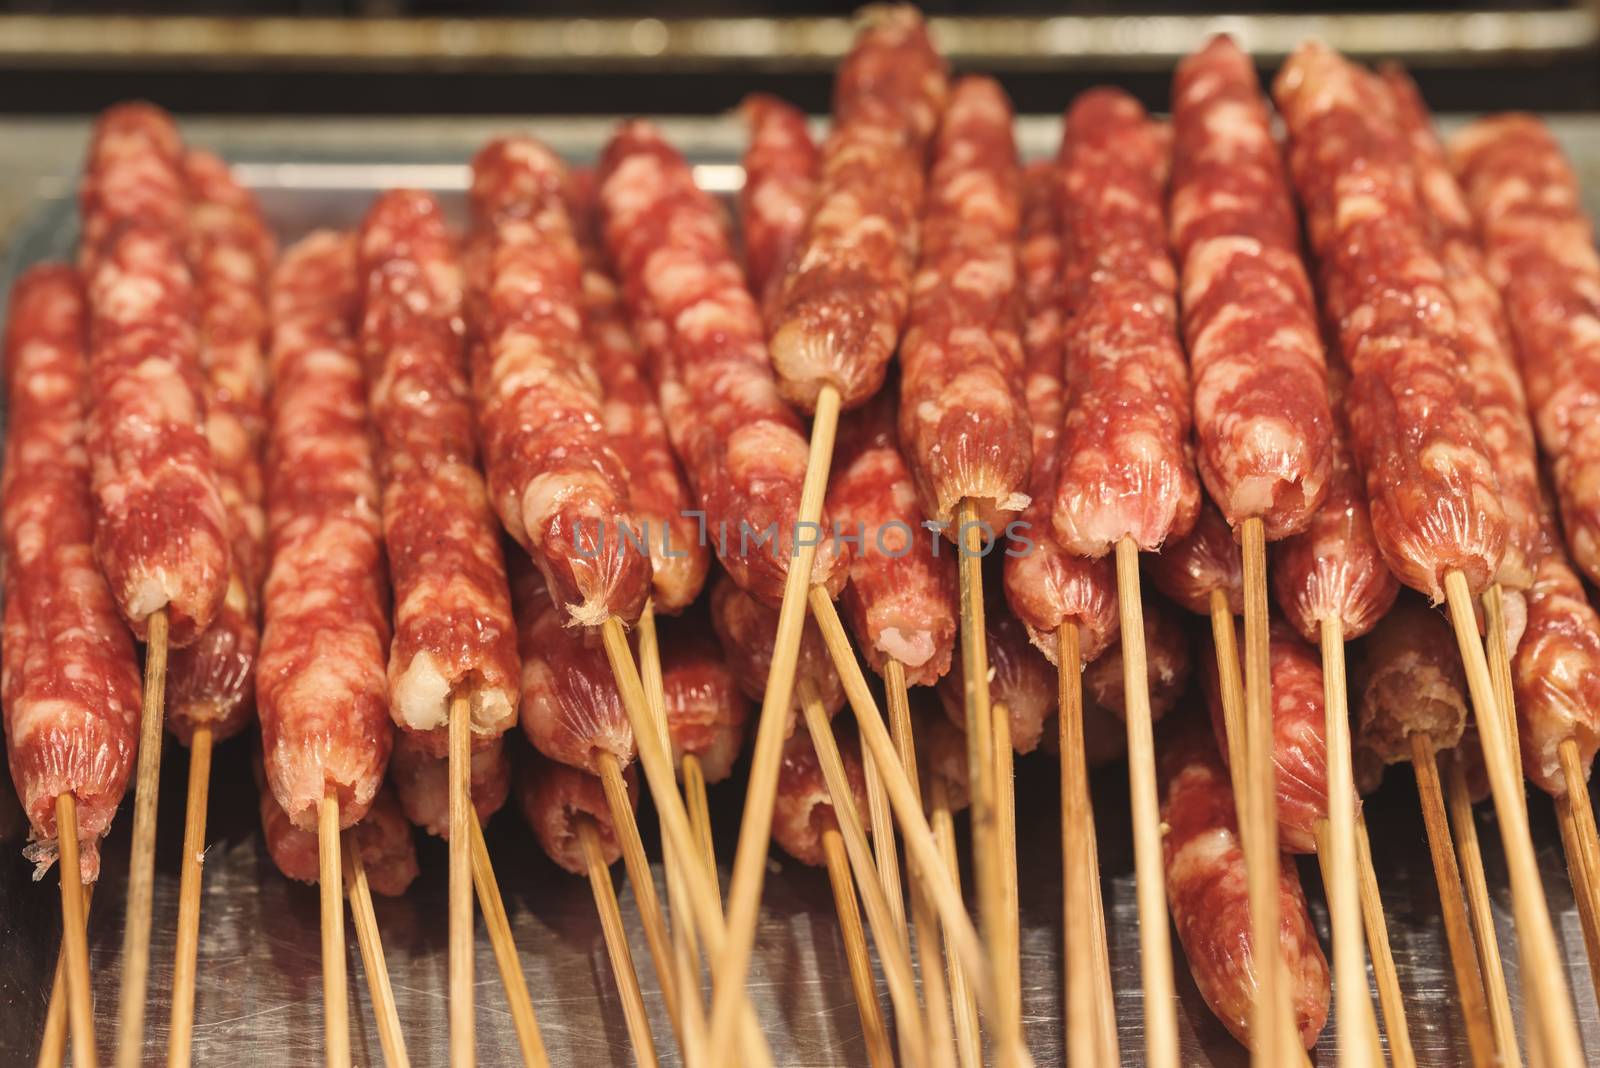 Street food asia. Meat on a stick.